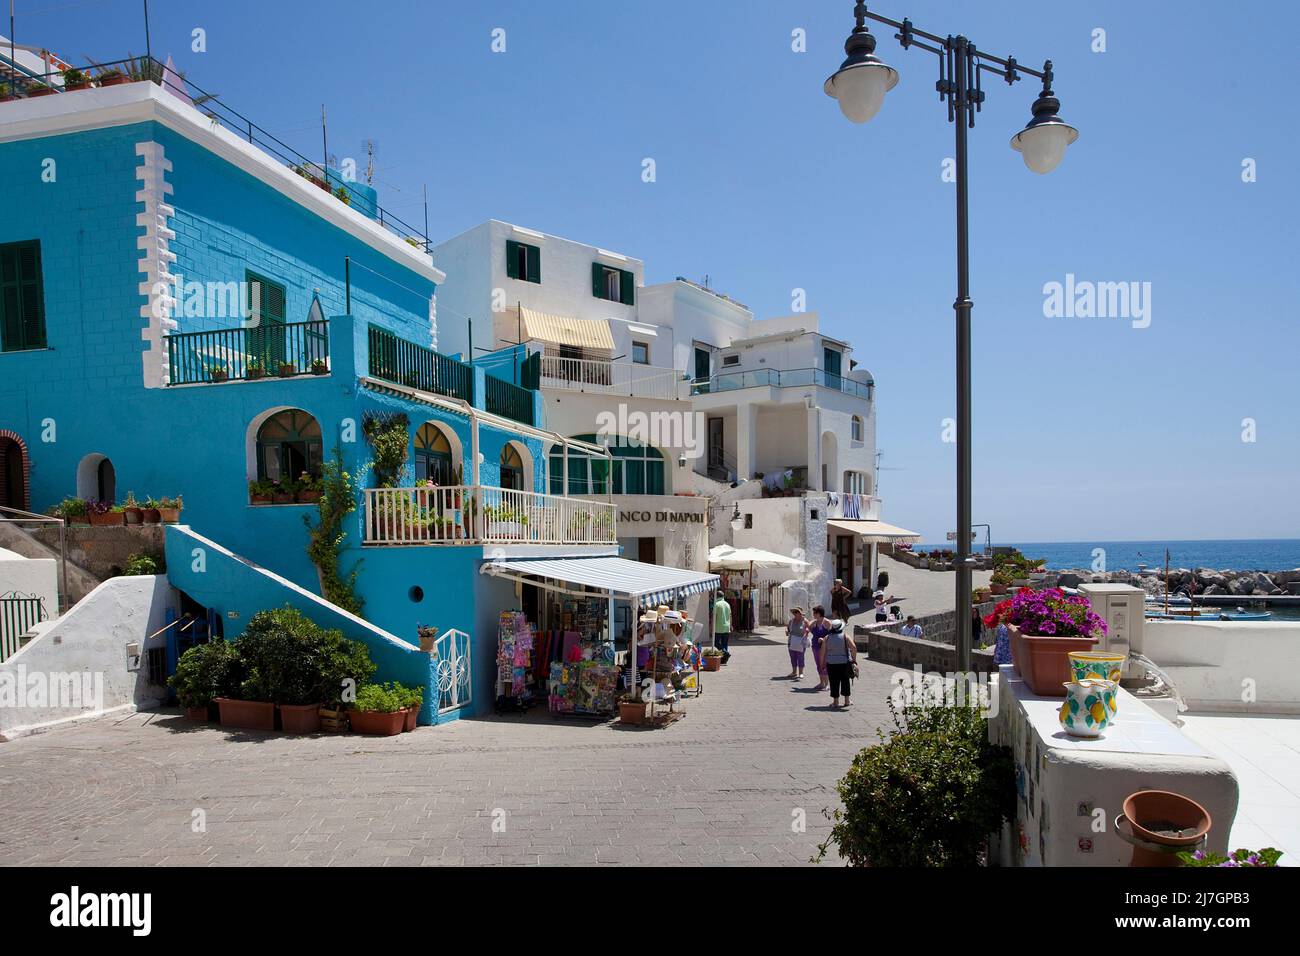 Souvenirshop in the picturesque fishing village Sant' Angelo, Ischia island, Gulf of Neapel, Italy, Mediterranean Sea, Europe Stock Photo